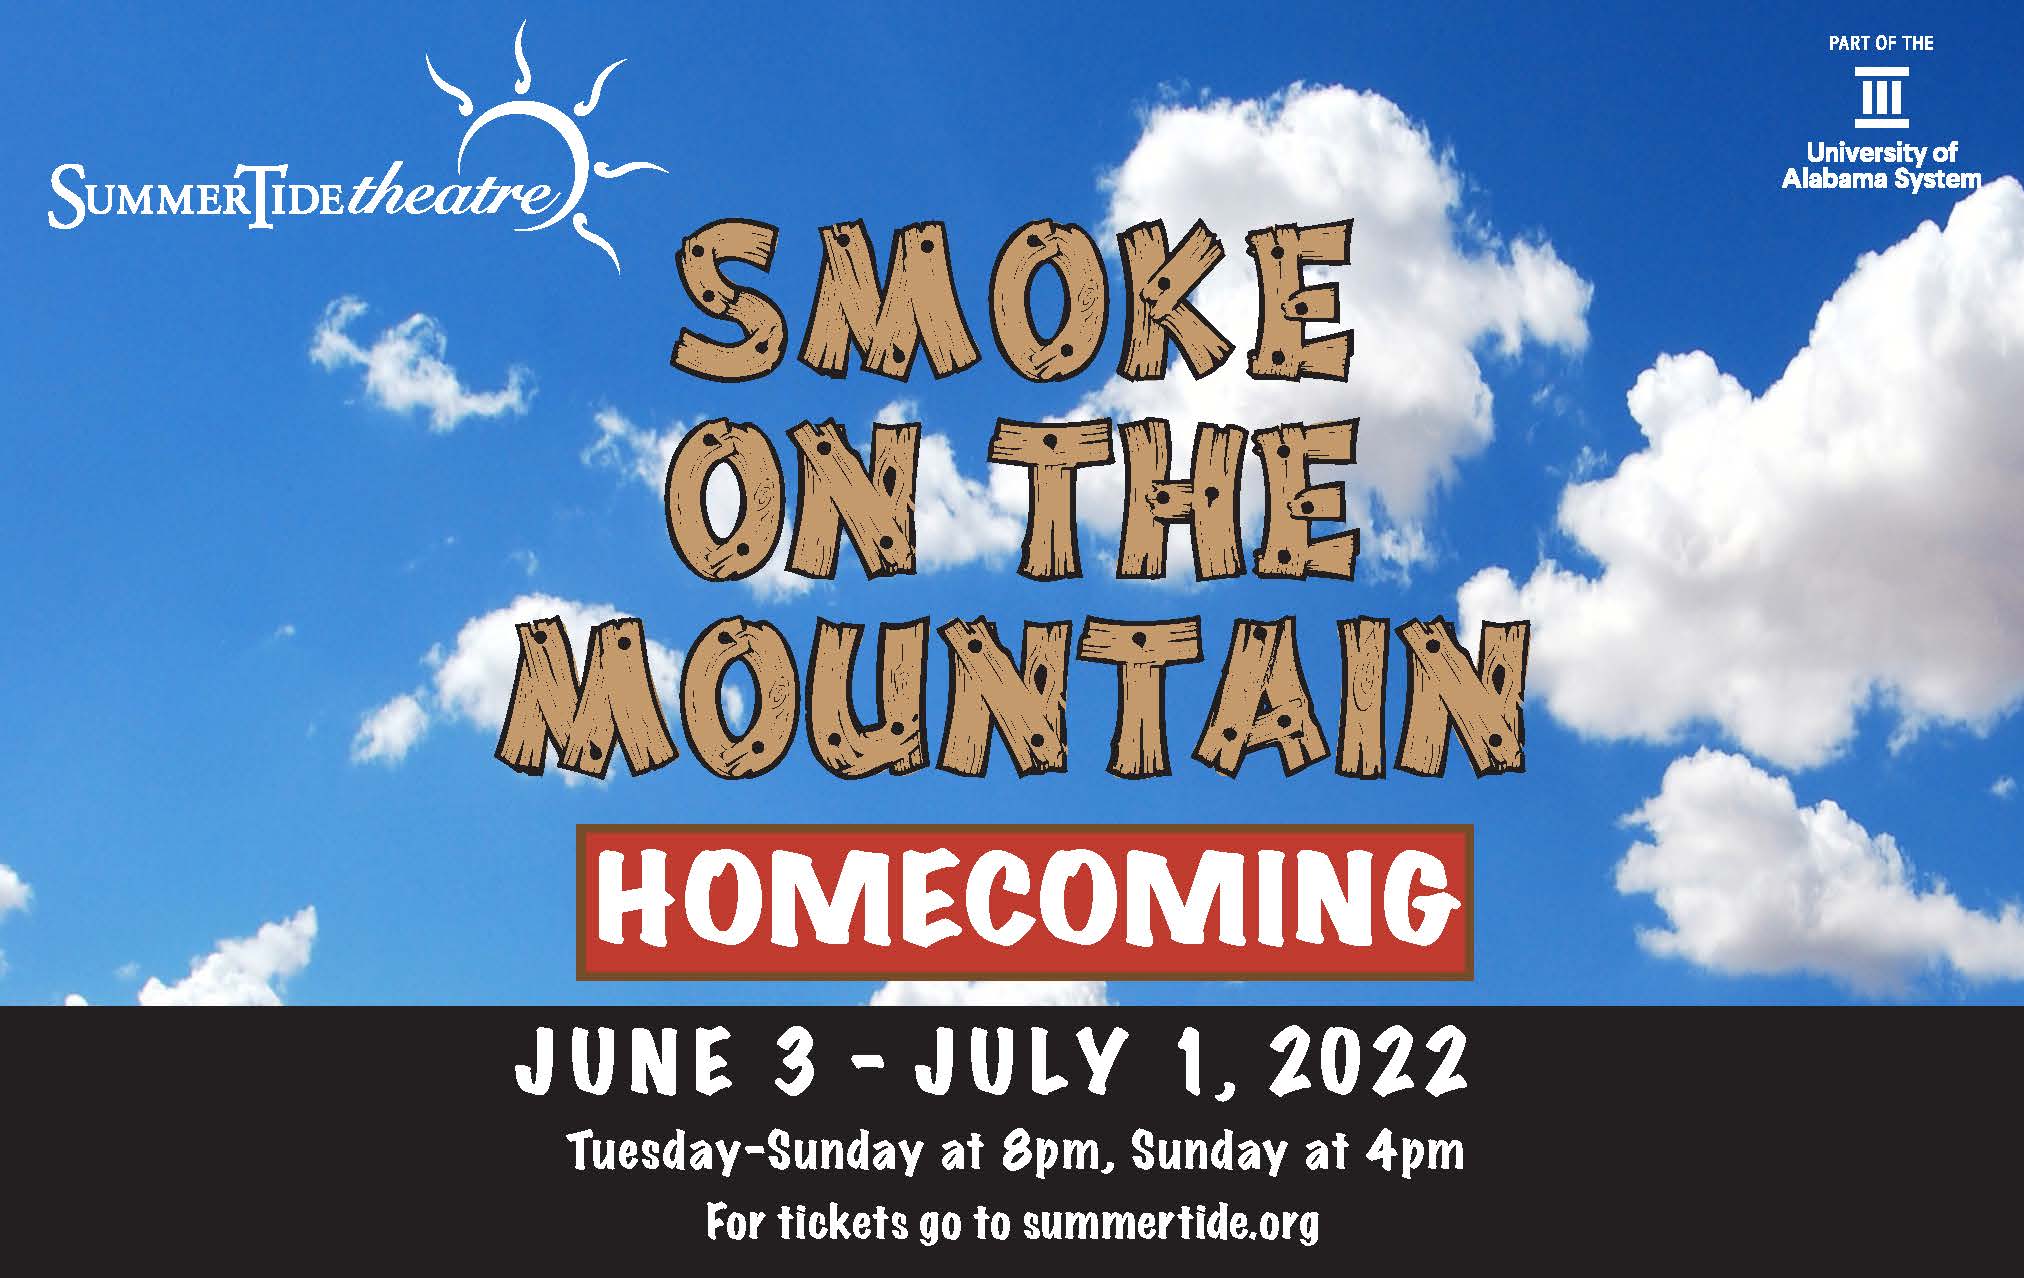 SummerTide Theatre's "Smoke on the Mountain Homecoming"